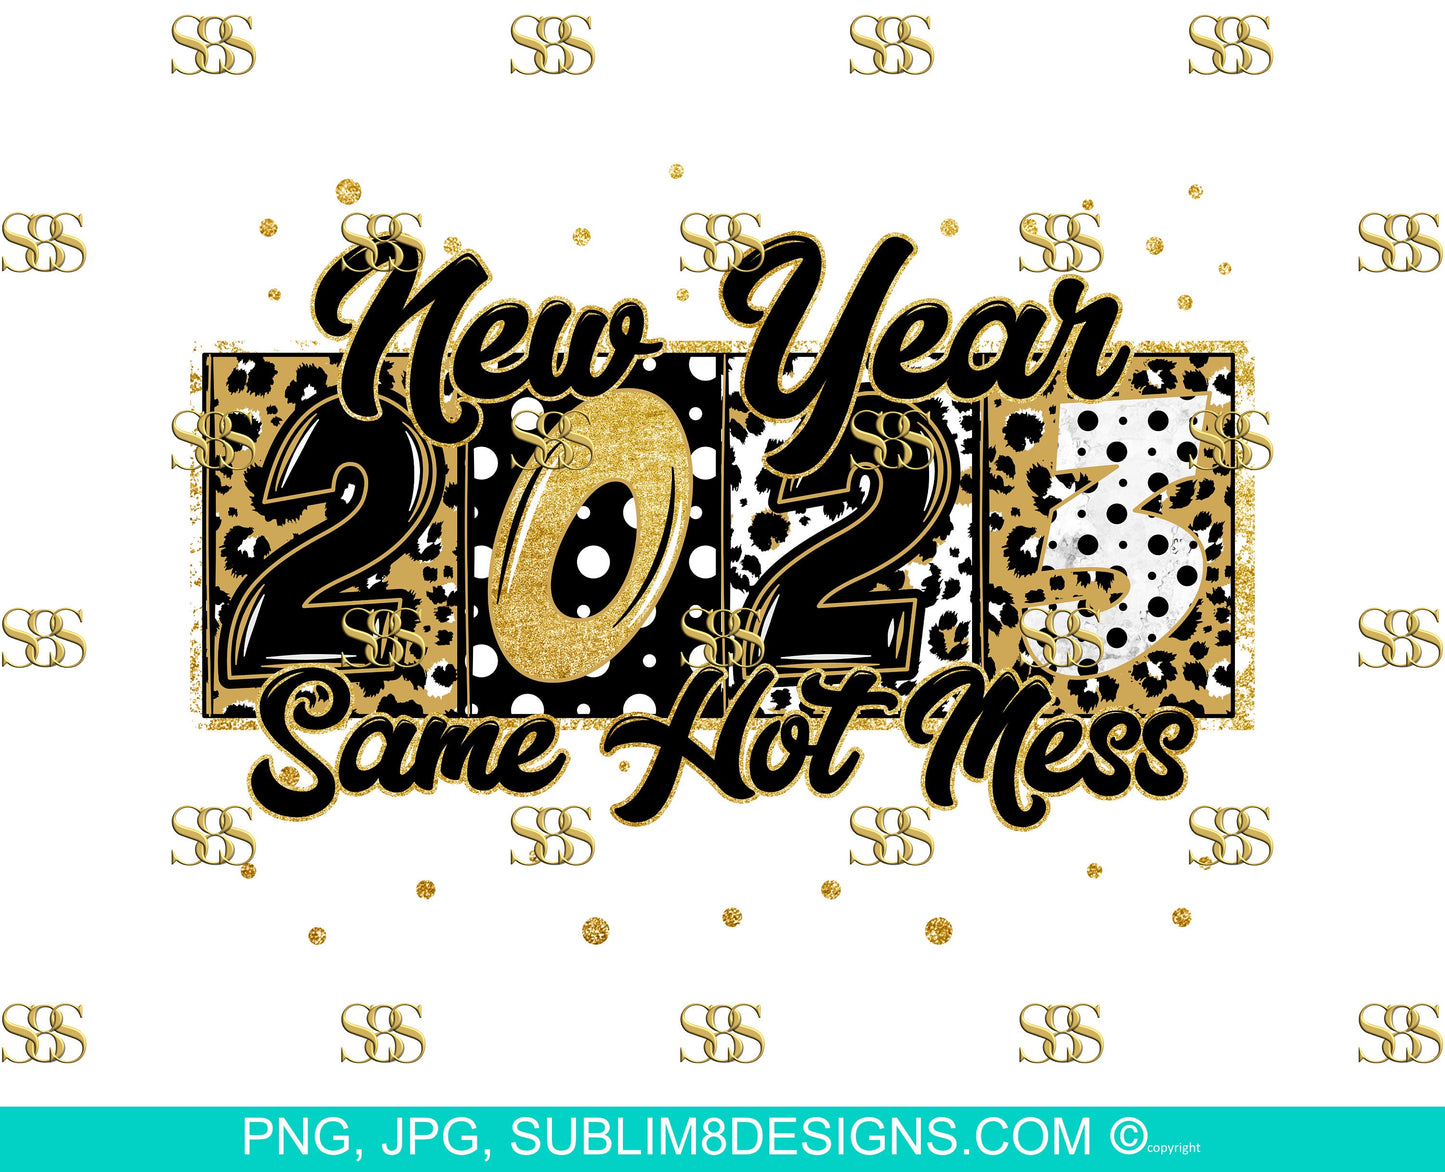 New Year Same Hot Mess 2023 Sublimation Design PNG and JPG ONLY